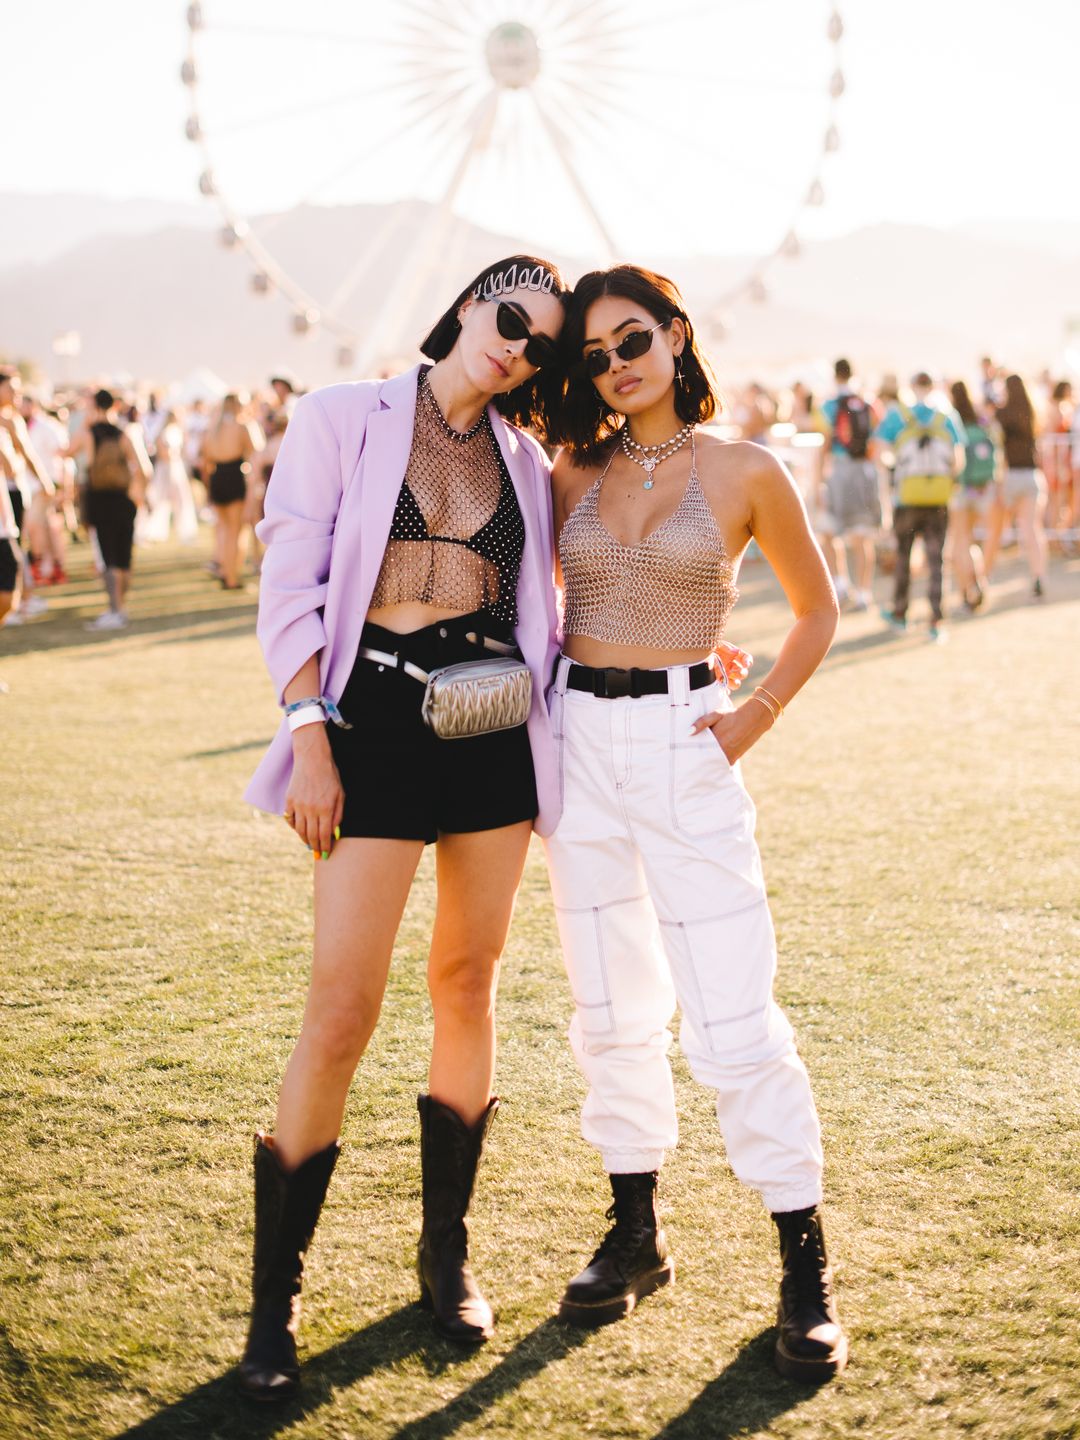 INDIO, CALIFORNIA - APRIL 13: Brittany Xavier and Jill Wallace street style at the 2019 Coachella Valley Music and Arts Festival Weekend 1 on April 13, 2019 in Indio, California. (Photo by Matt Winkelmeyer/Getty Images for Coachella)